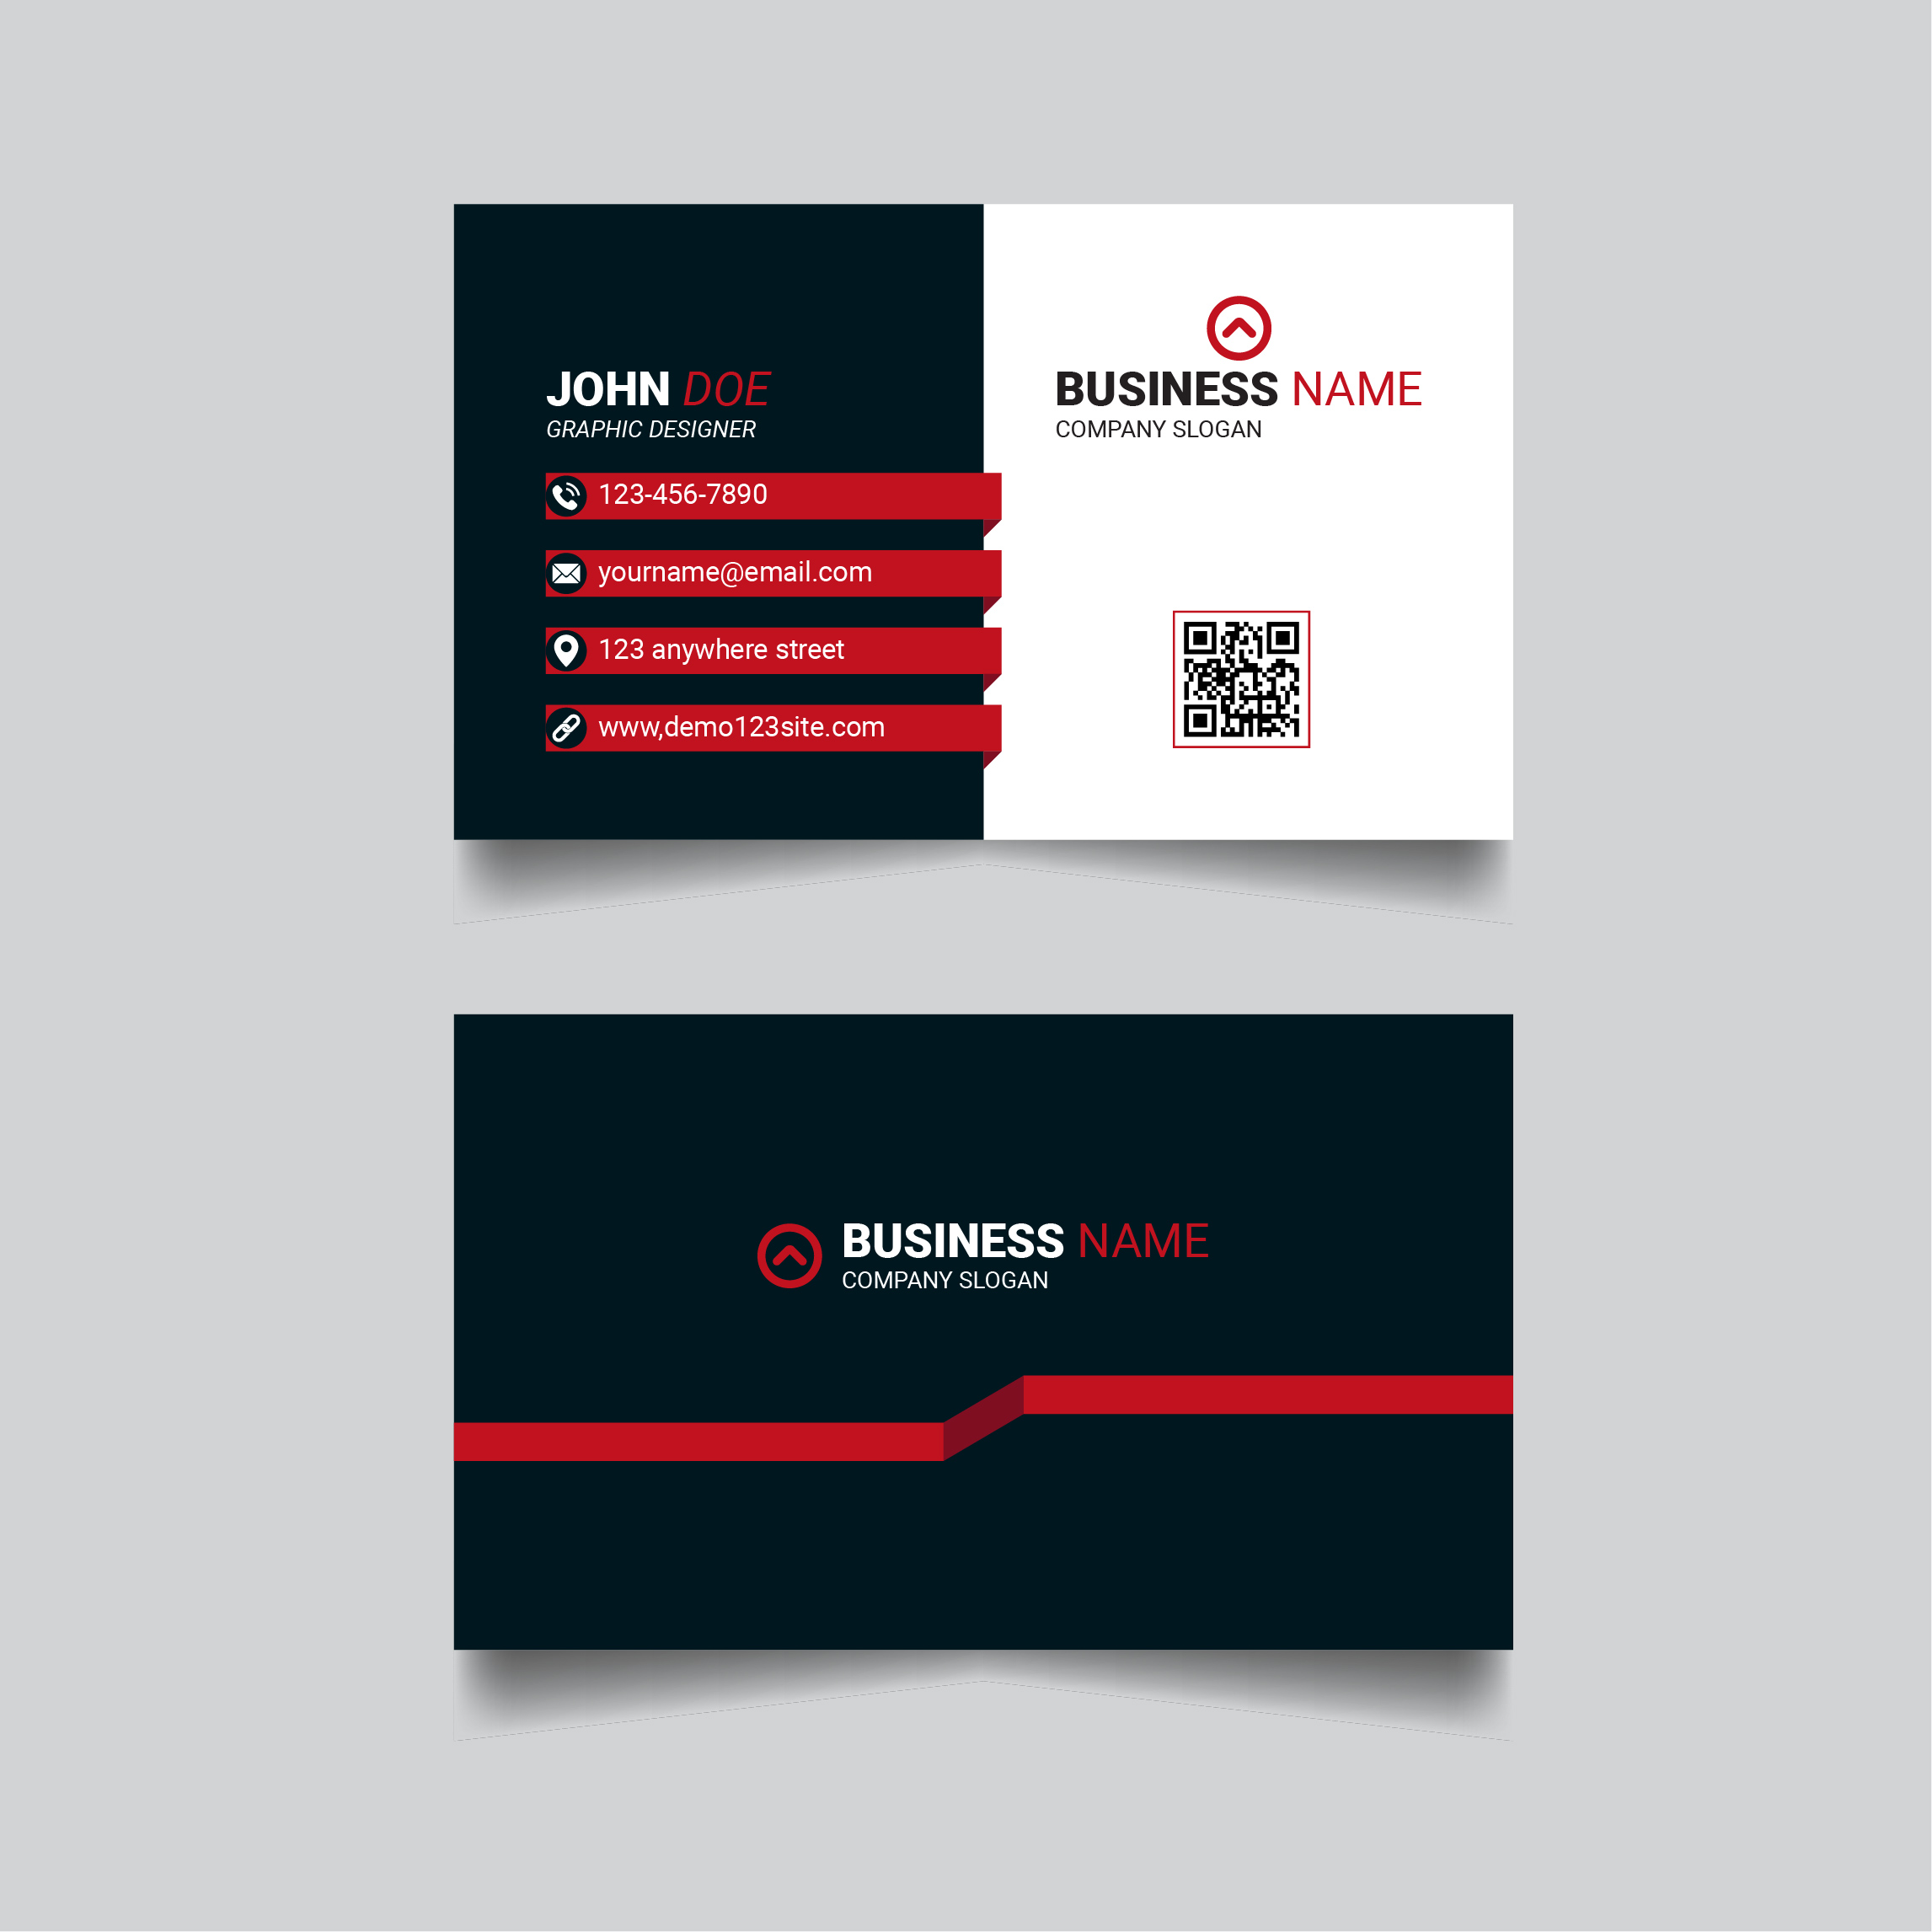 Professional Black and Red Creative Business Card Template Design main cover.